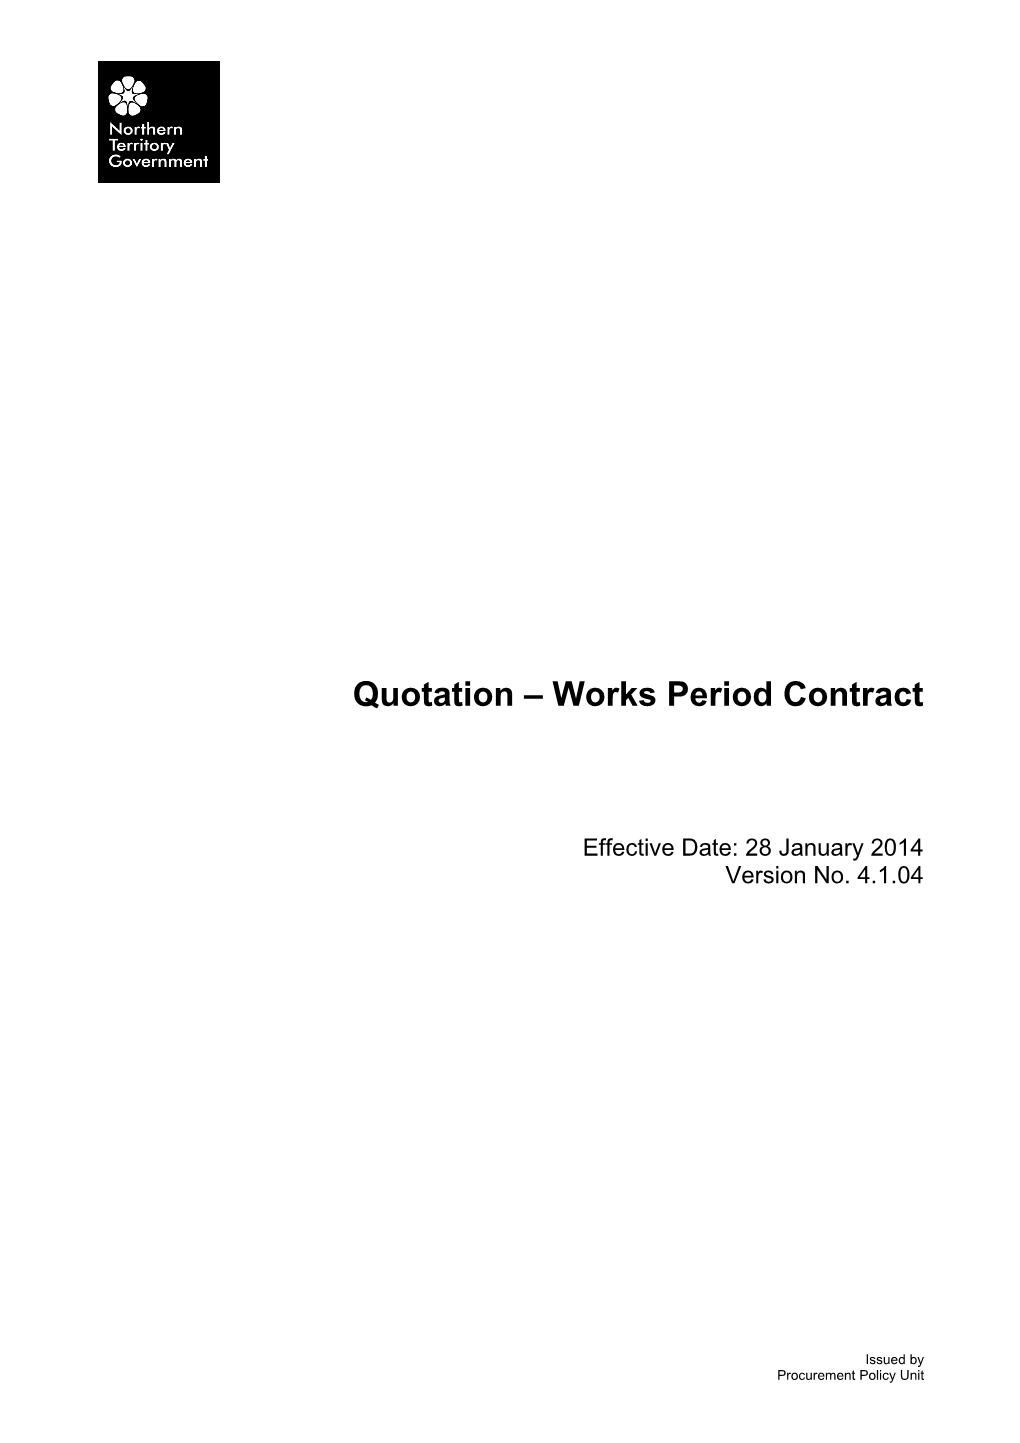 Quotation Works Period Contract - V 4.1.04 (28 January 2014)